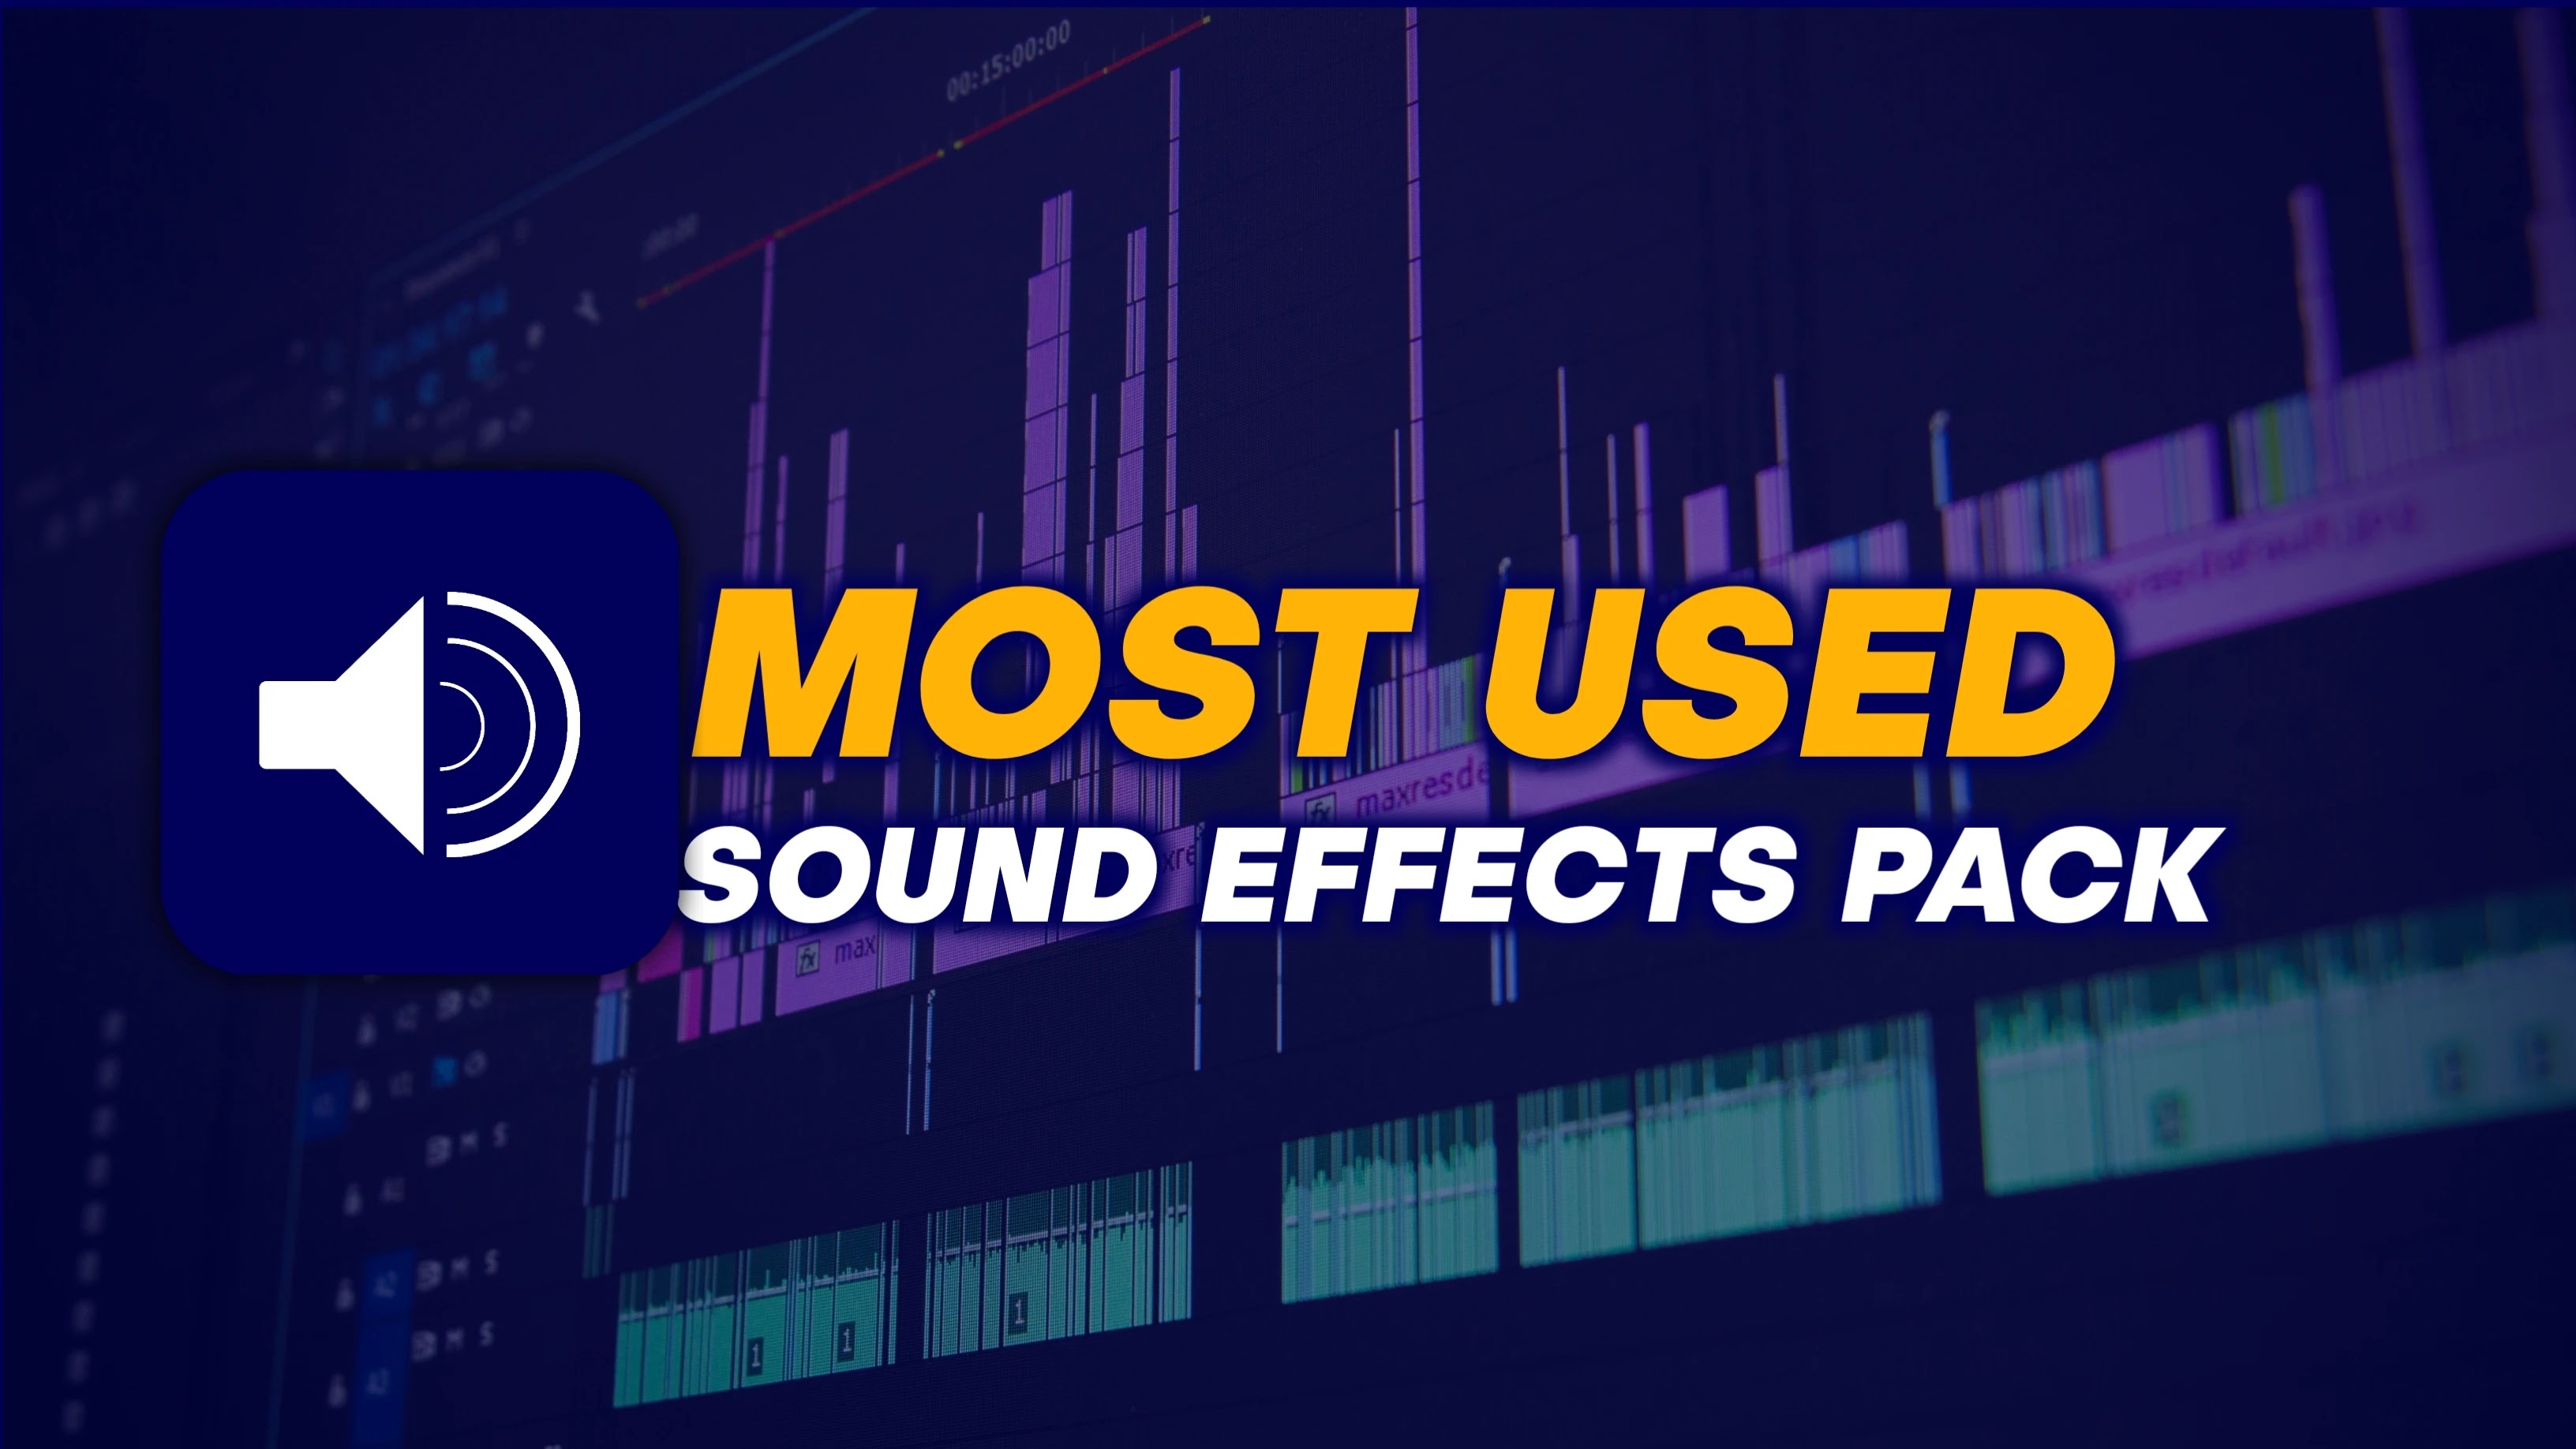 Sound effects used by popular Youtubers download